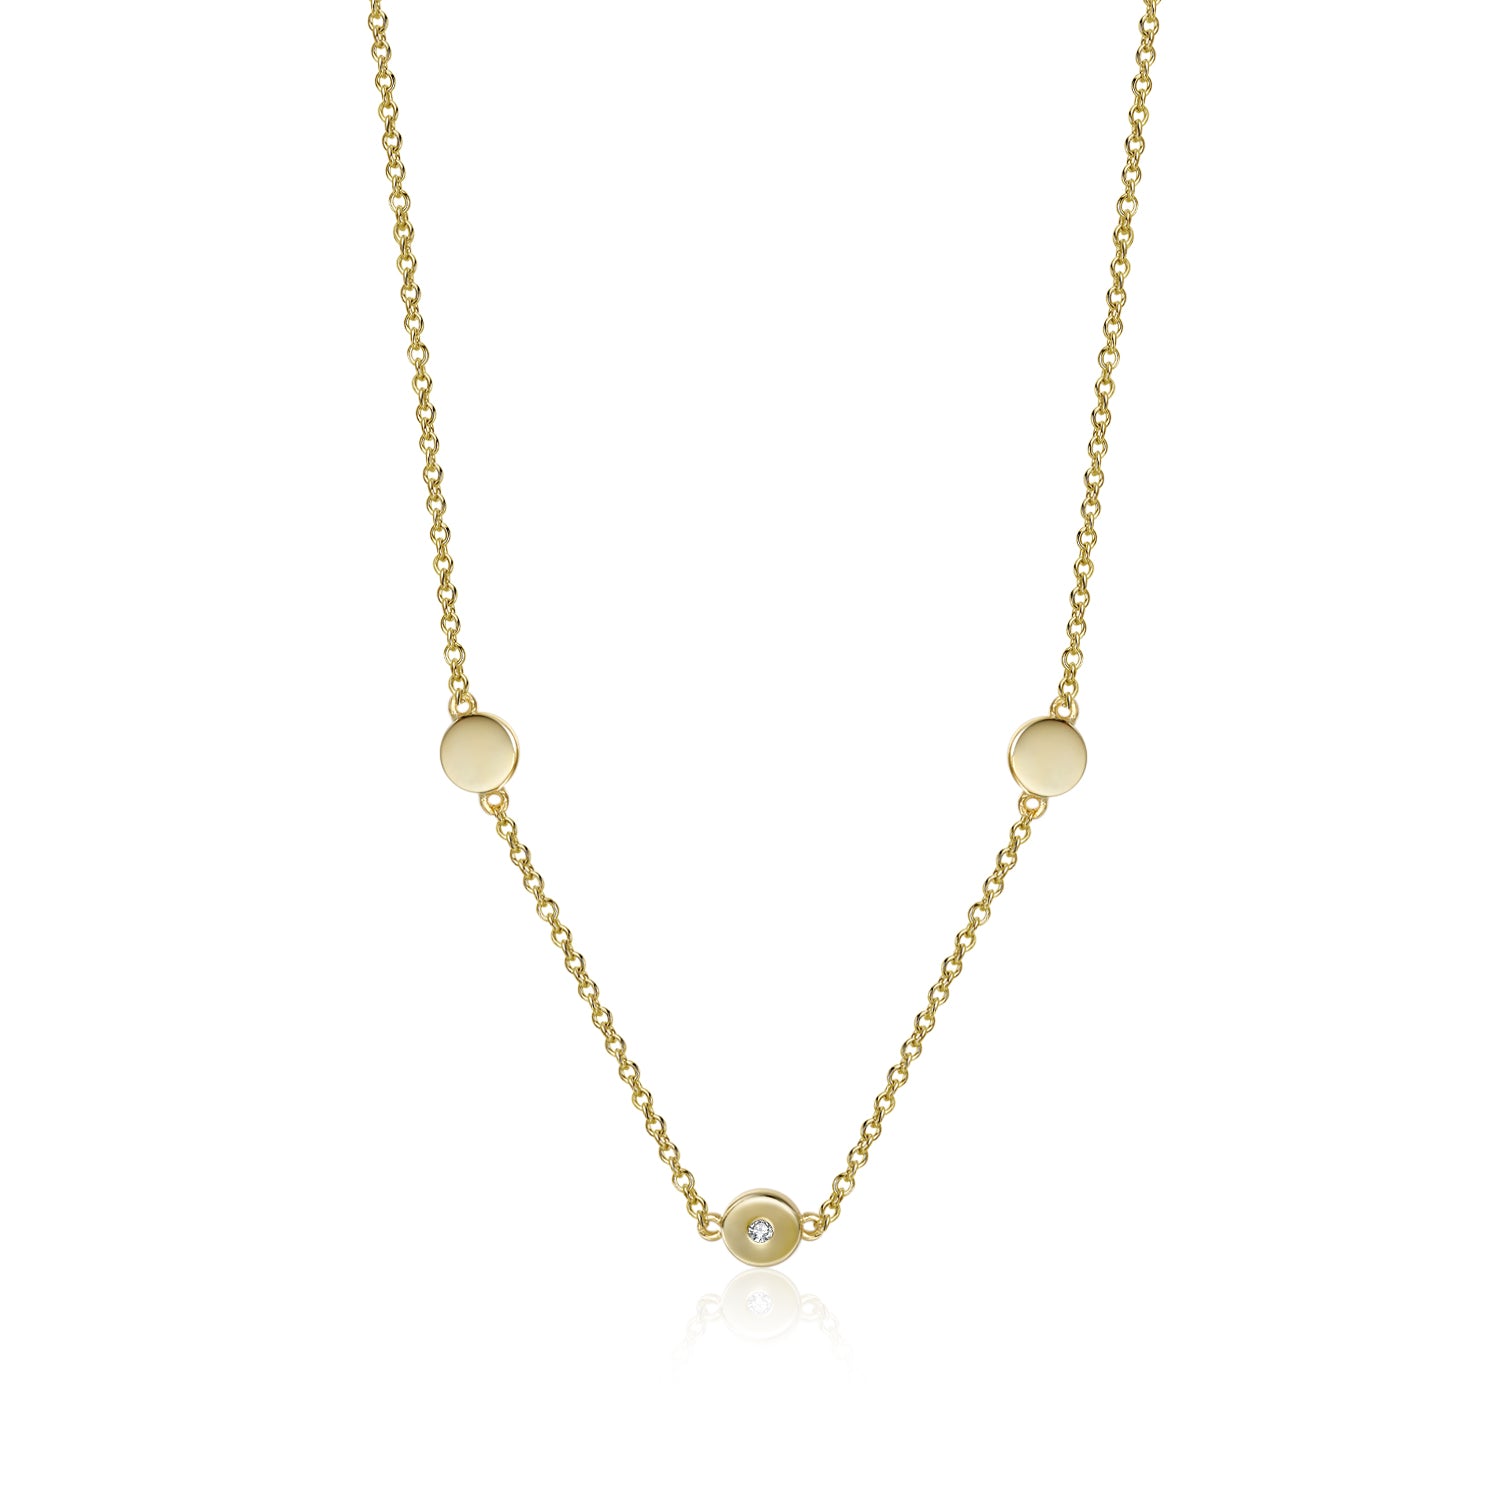 AEIWO 18K YELLOW GOLD PLATED DOT DASH BALL BEAD CHAIN NECKLACE 44.5cm  ACCESSORY | eBay